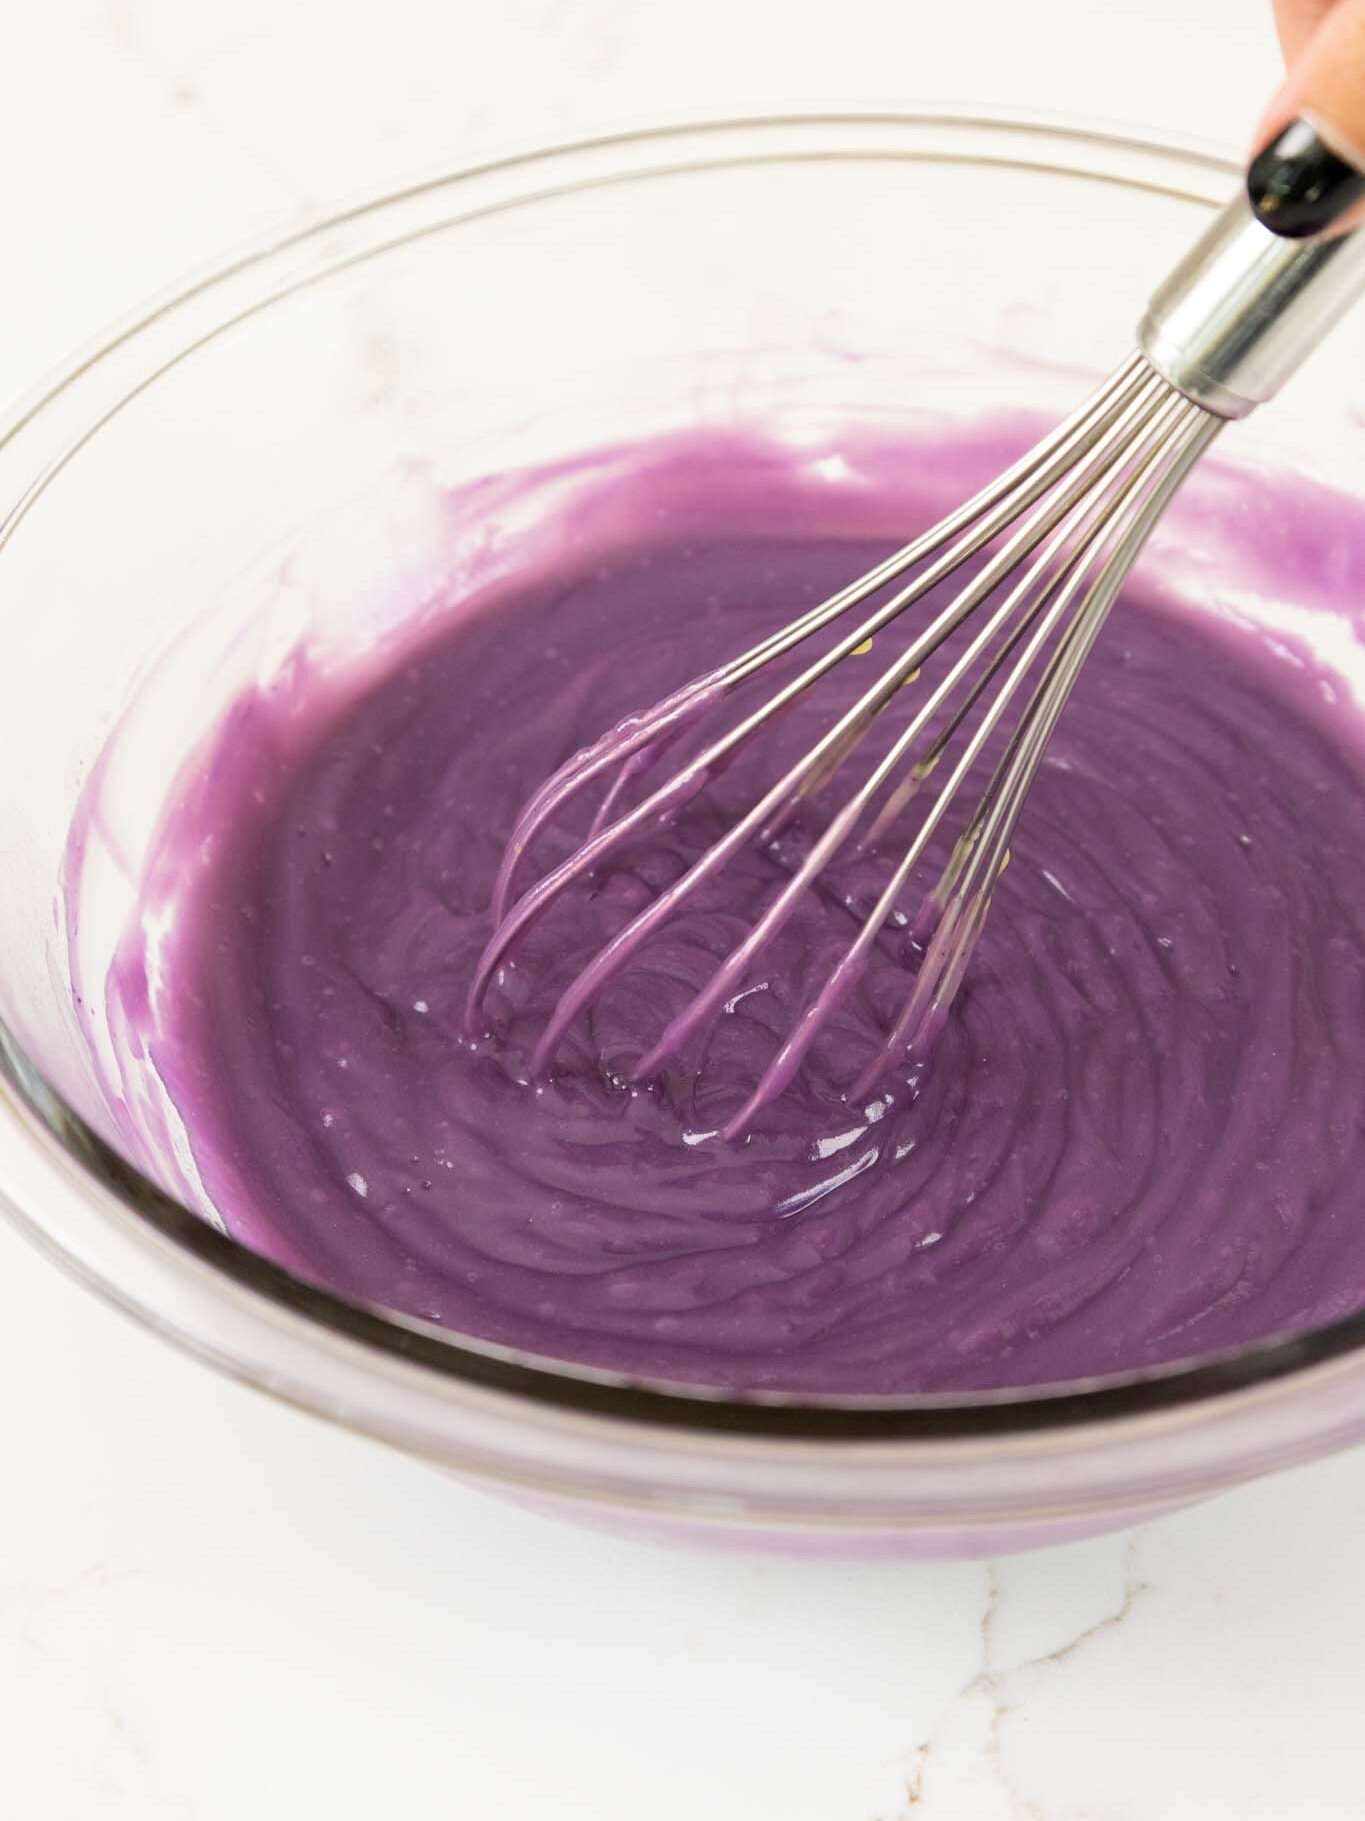 image of purple vanilla pudding being mixed in a glass bowl